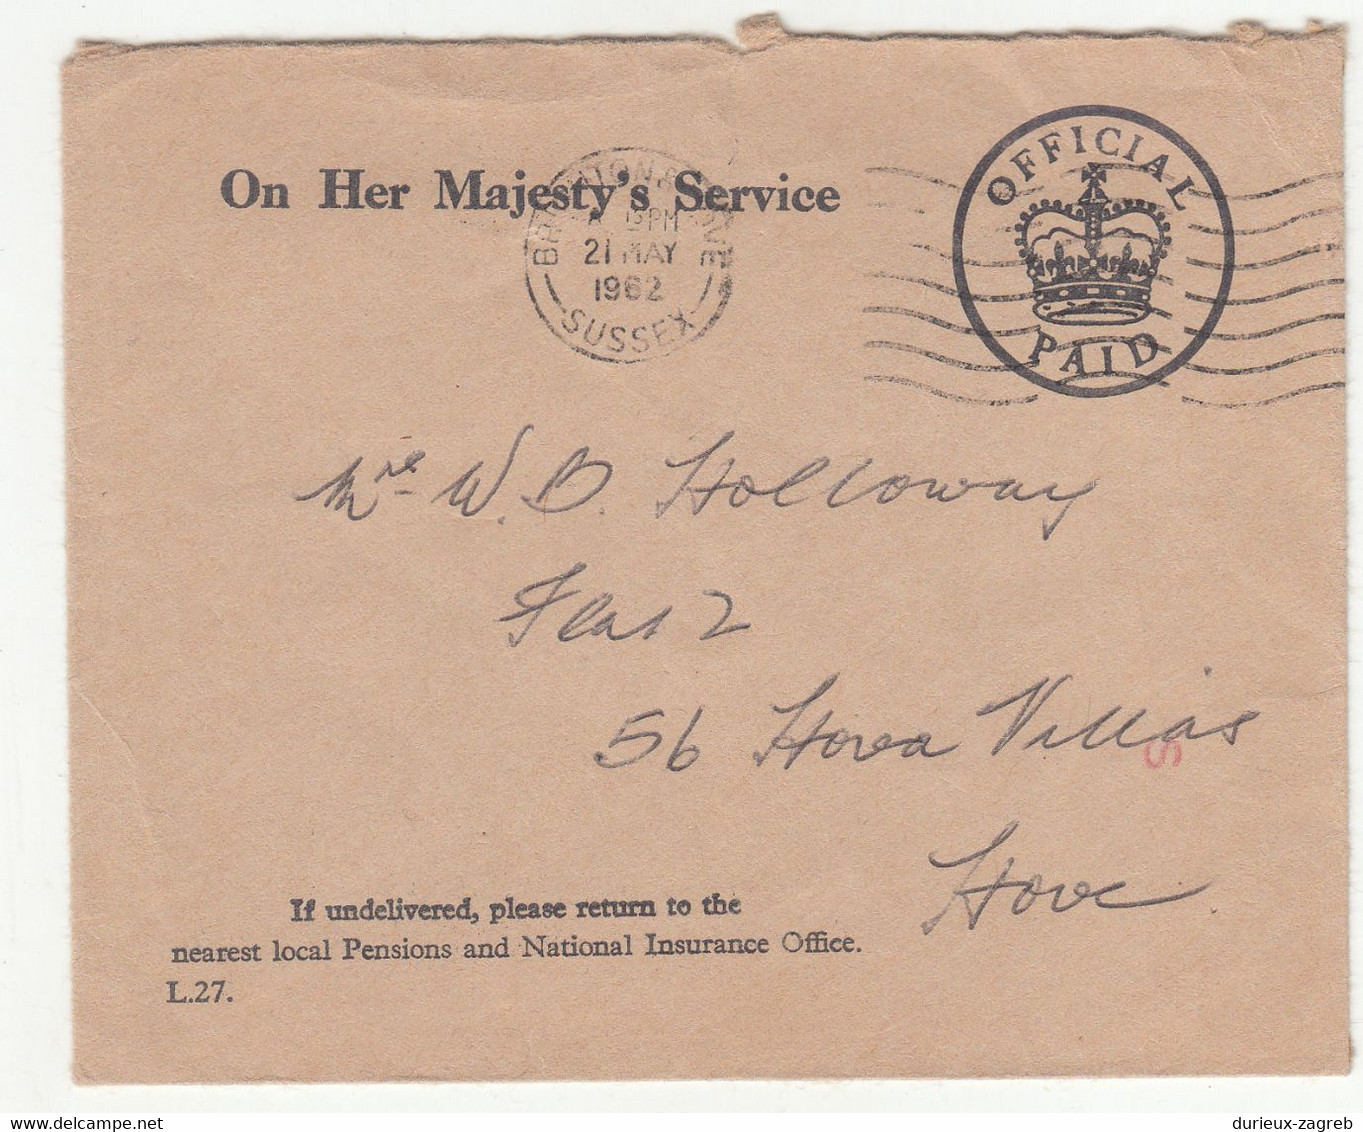 OHMS Official Letter Cover Posted 1962 B221201 - Service